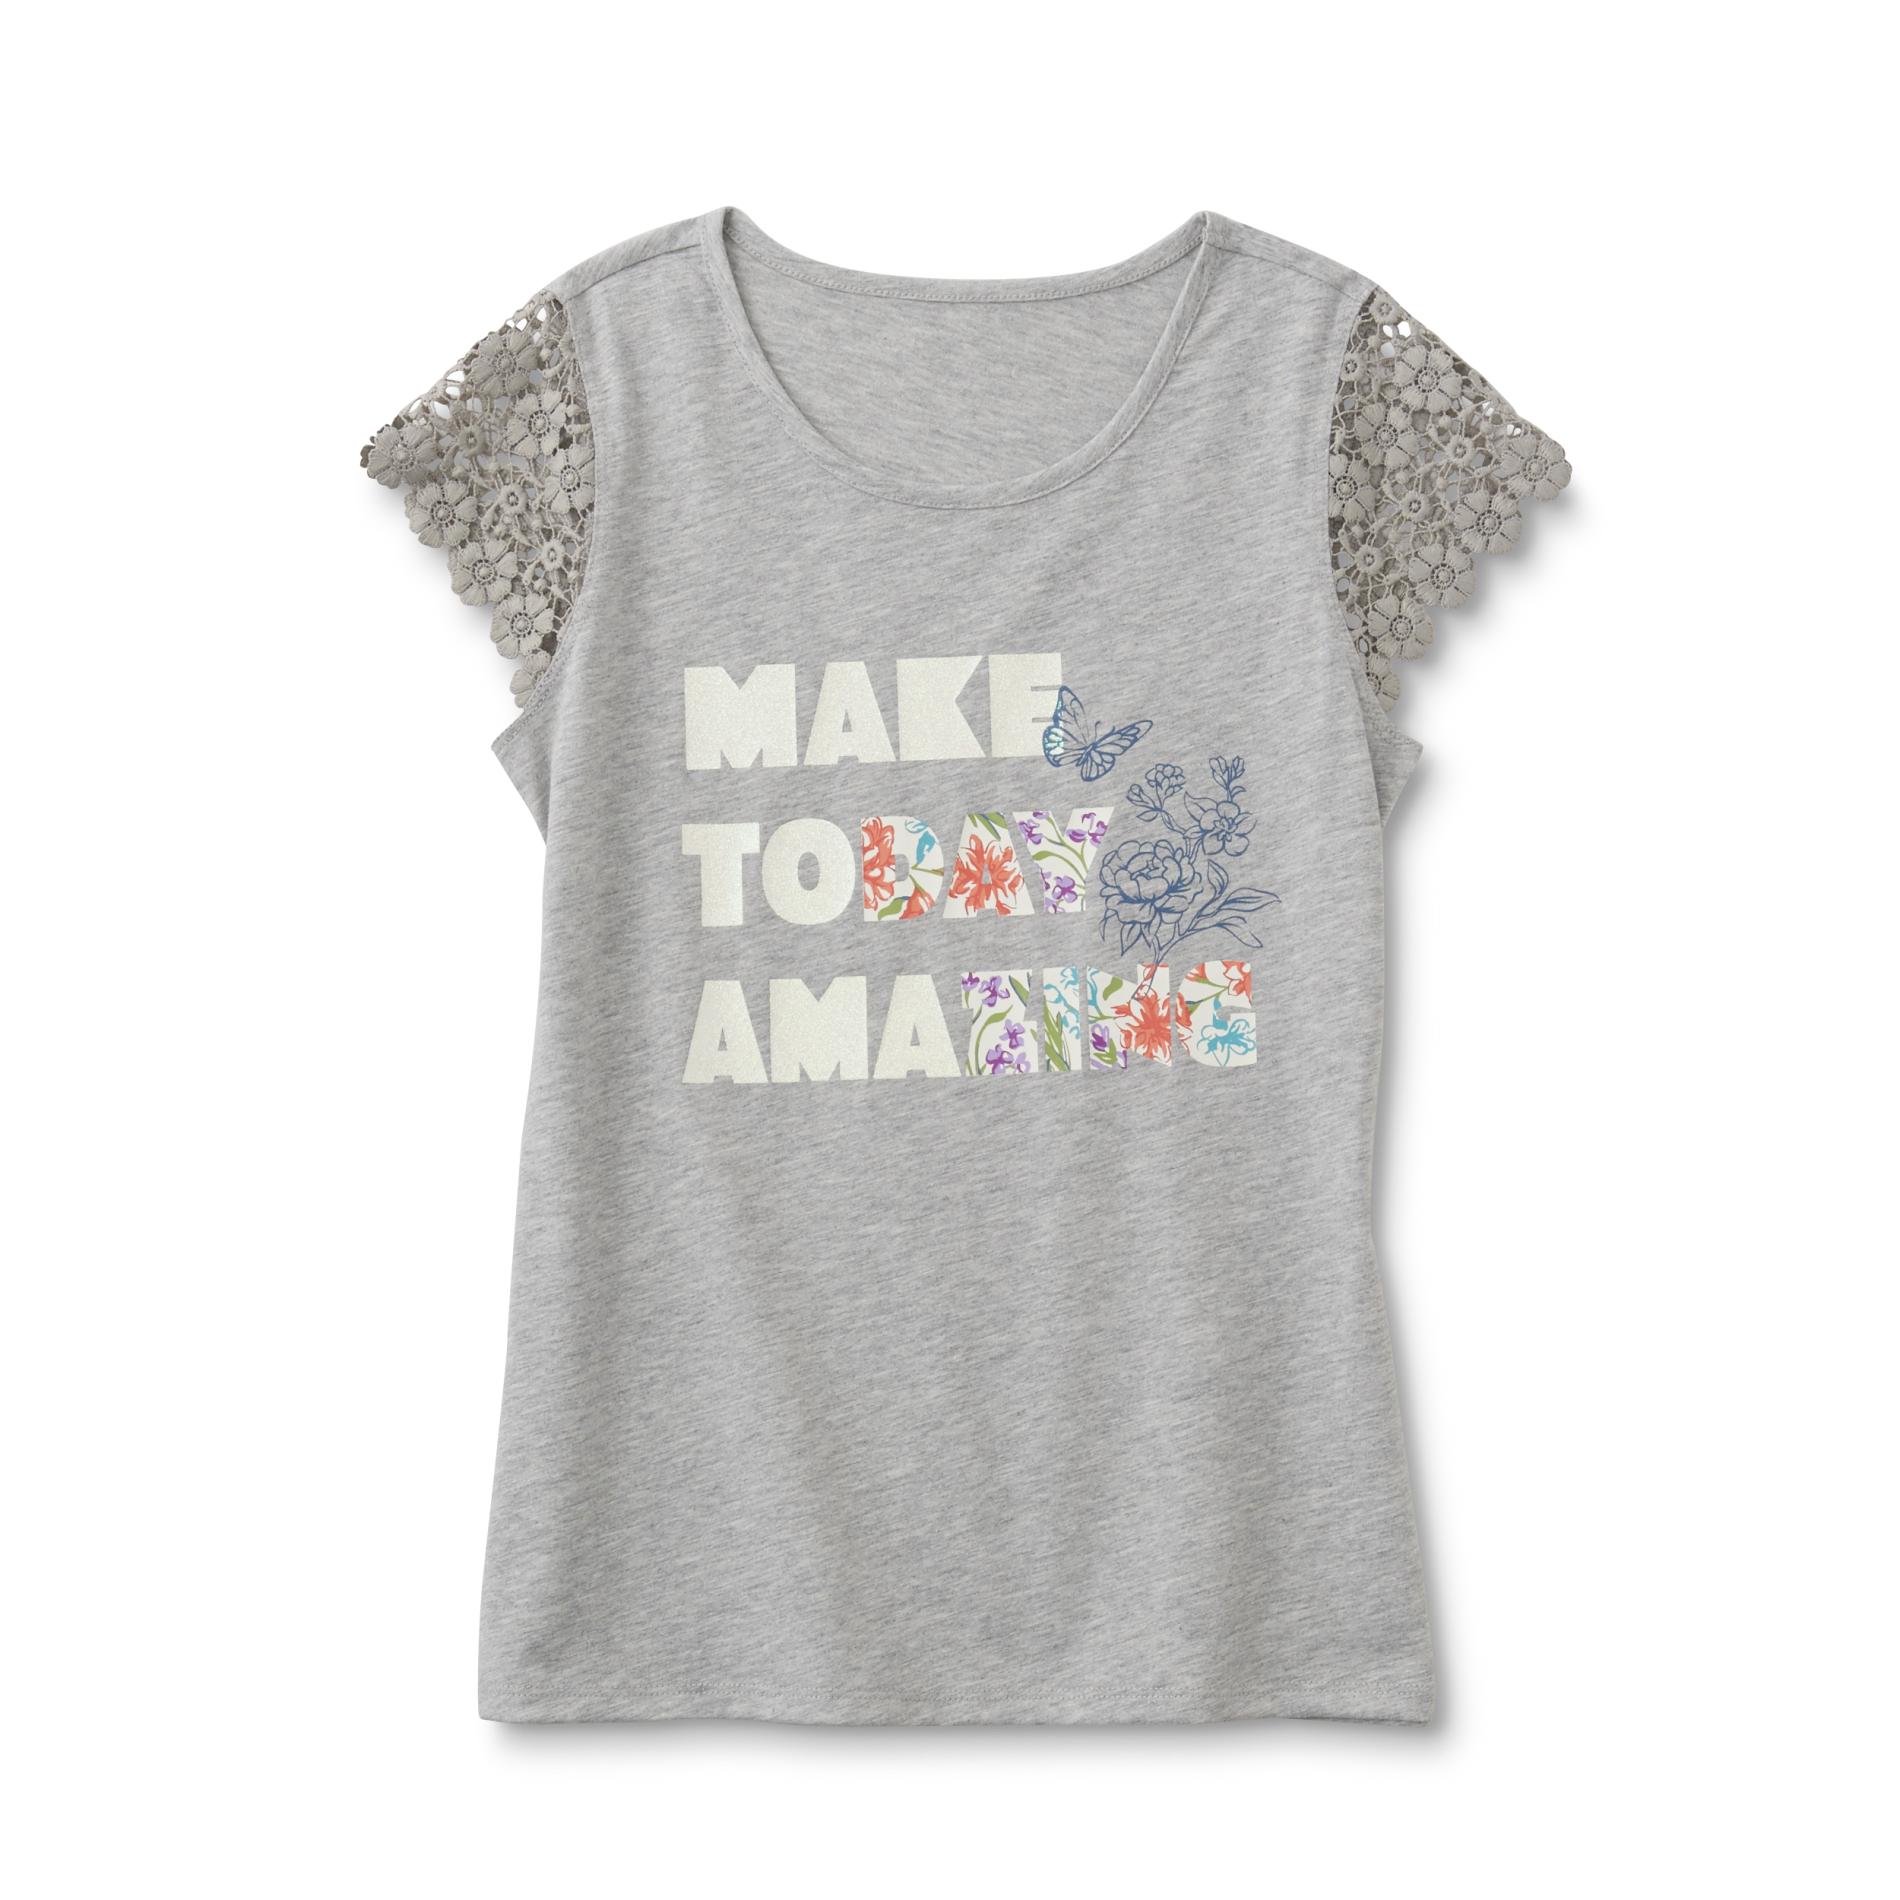 Canyon River Blues Girls' Printed Top - Make Today Amazing